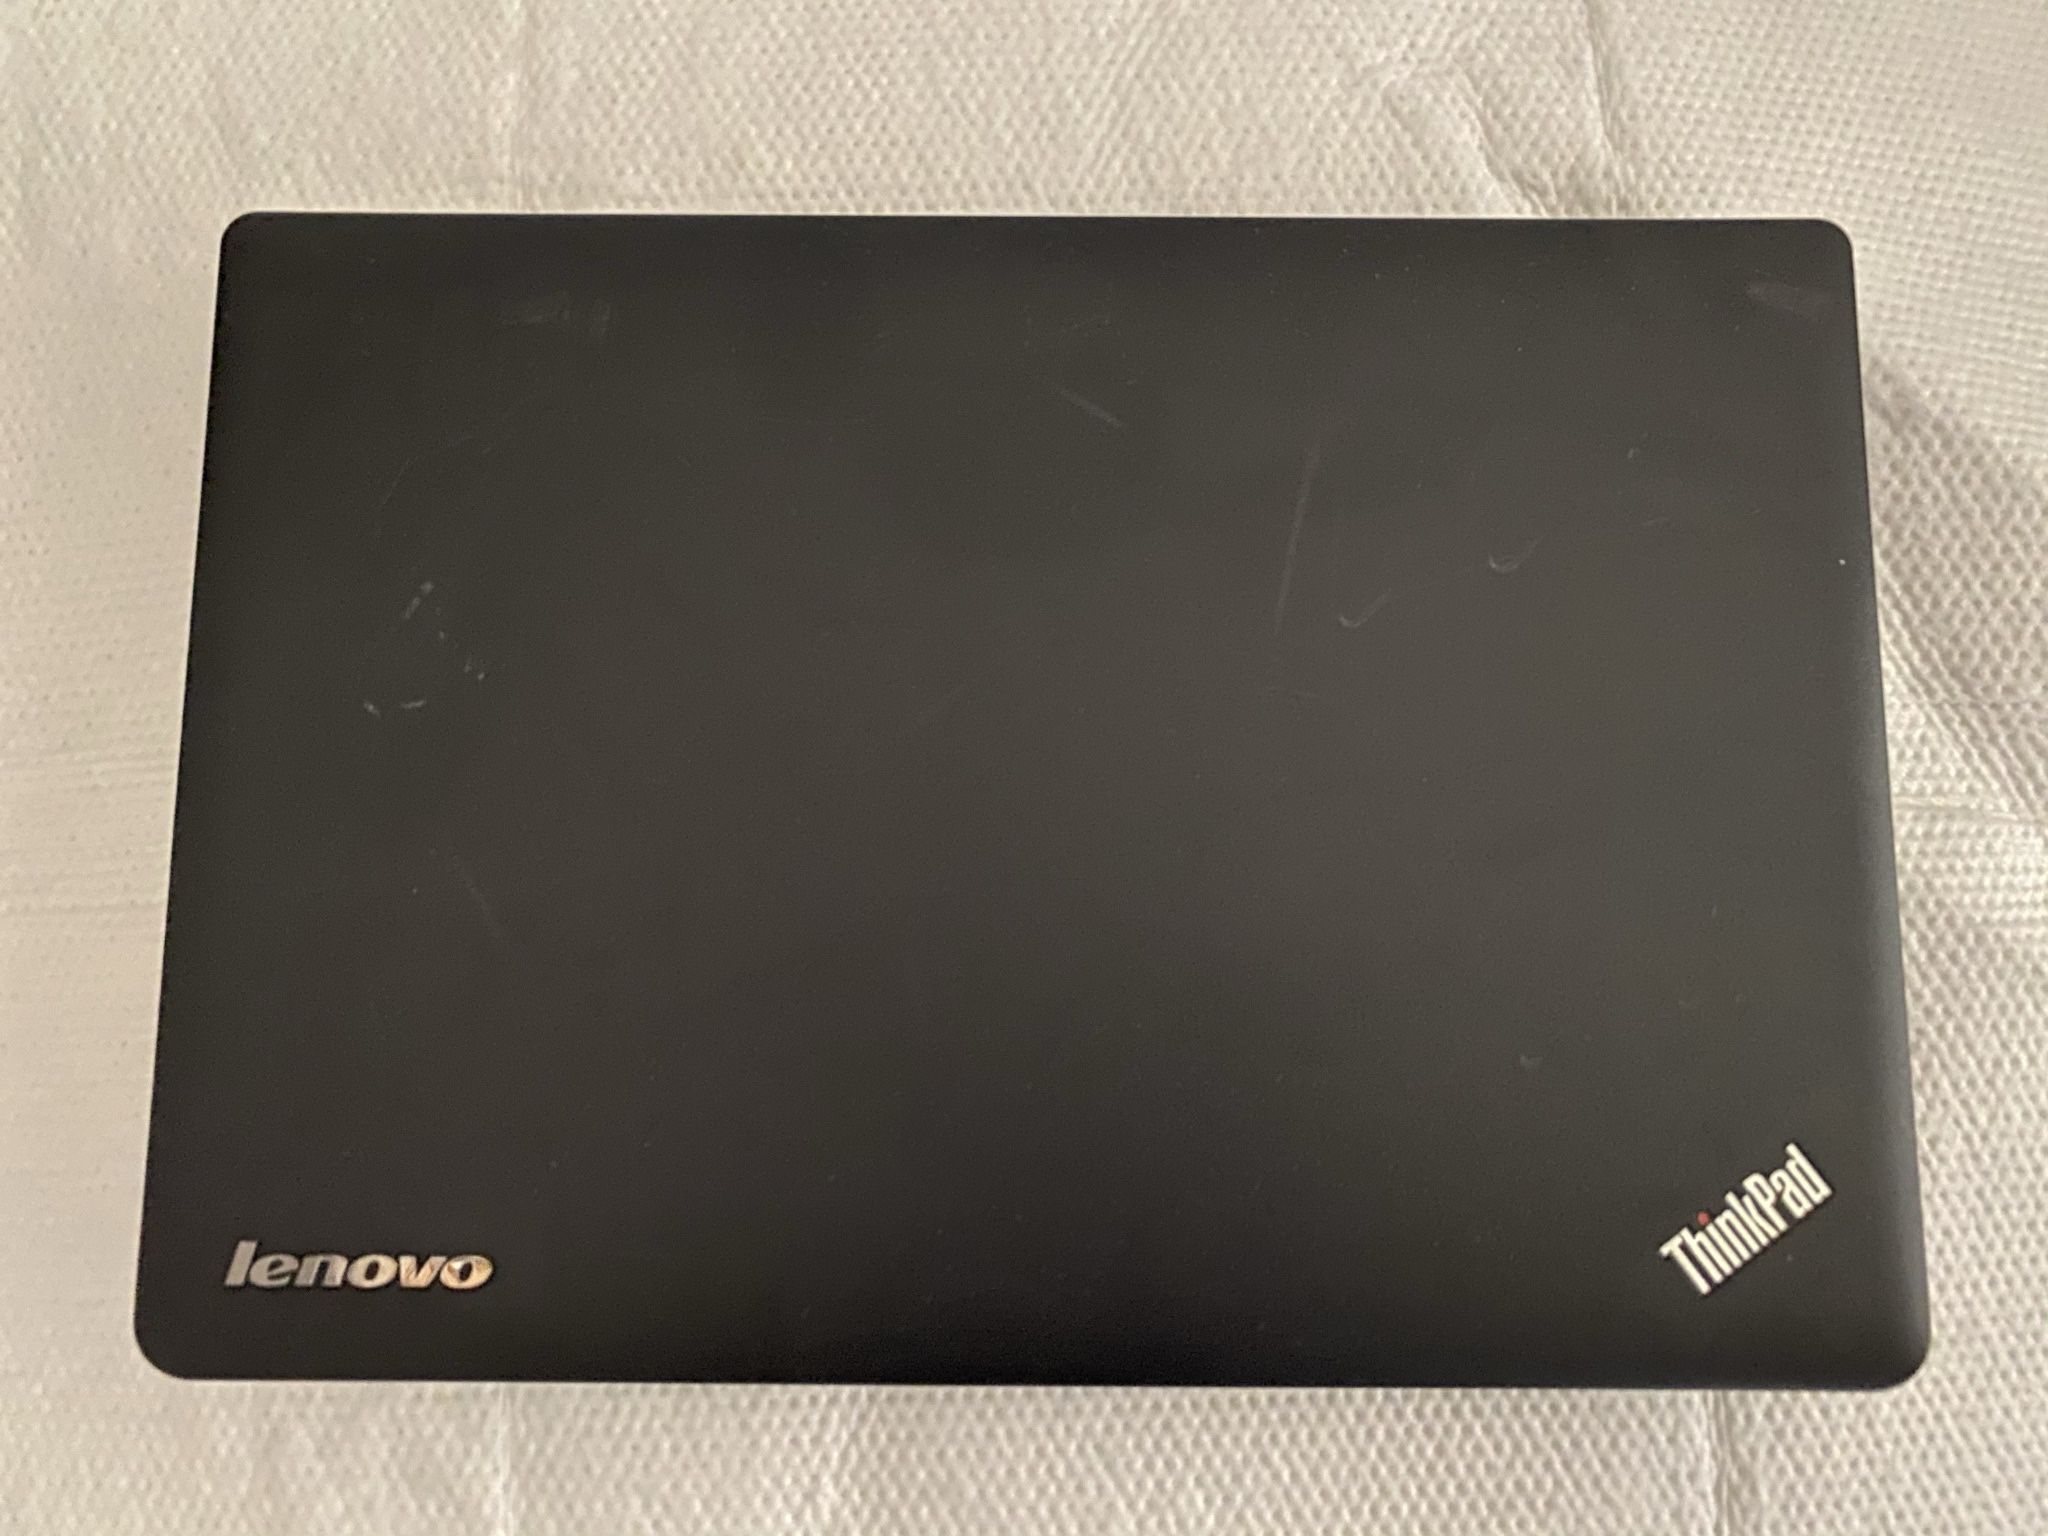 Condition: Used - Good, minLenovo ThinkPad E430c 8GB RAM i3 Processor 128GB Windows 10 Pro SSD  Priced to sell really quick, PRICE IS FIRM 